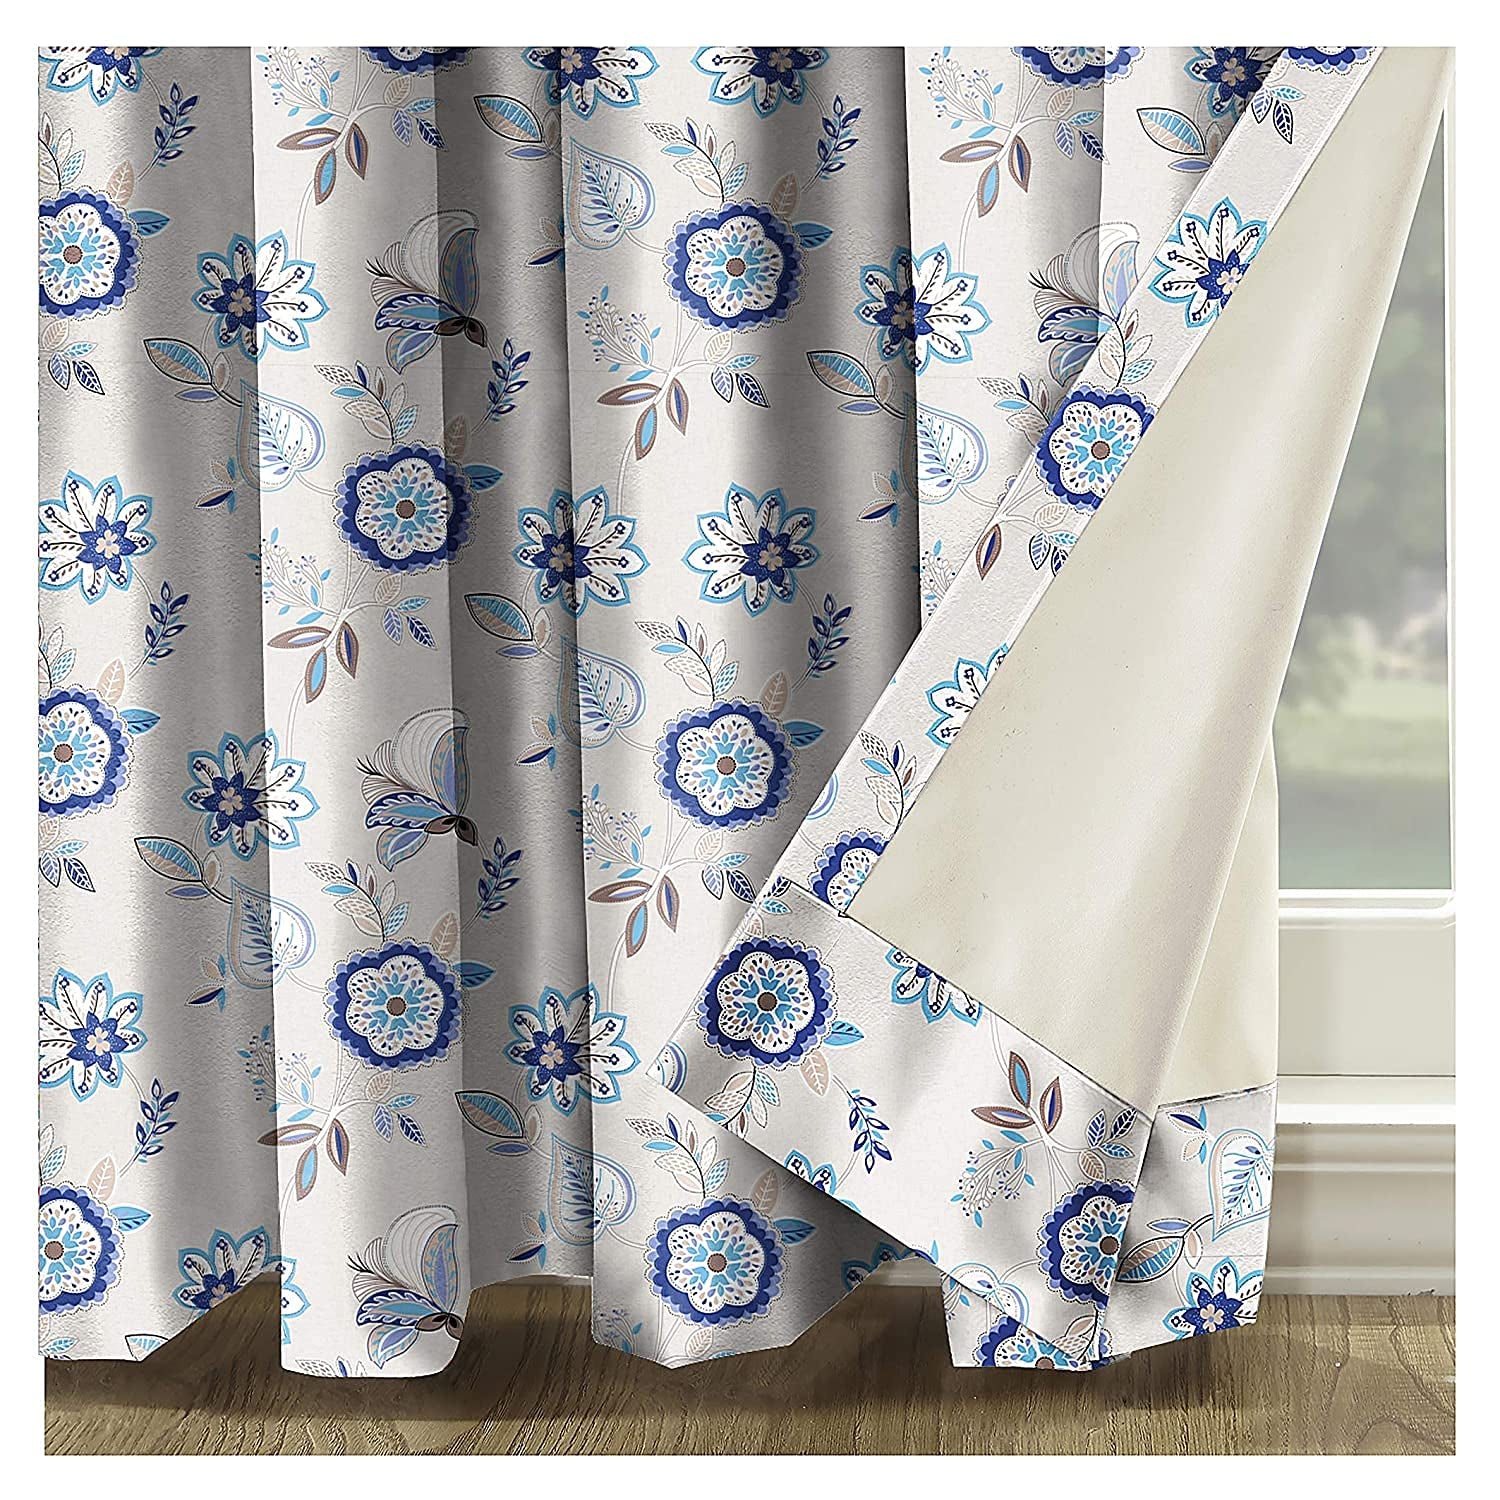 BEAU BLUE CURTAIN BLACKOUT PRINTED FOR LIVING & BEDROOMS